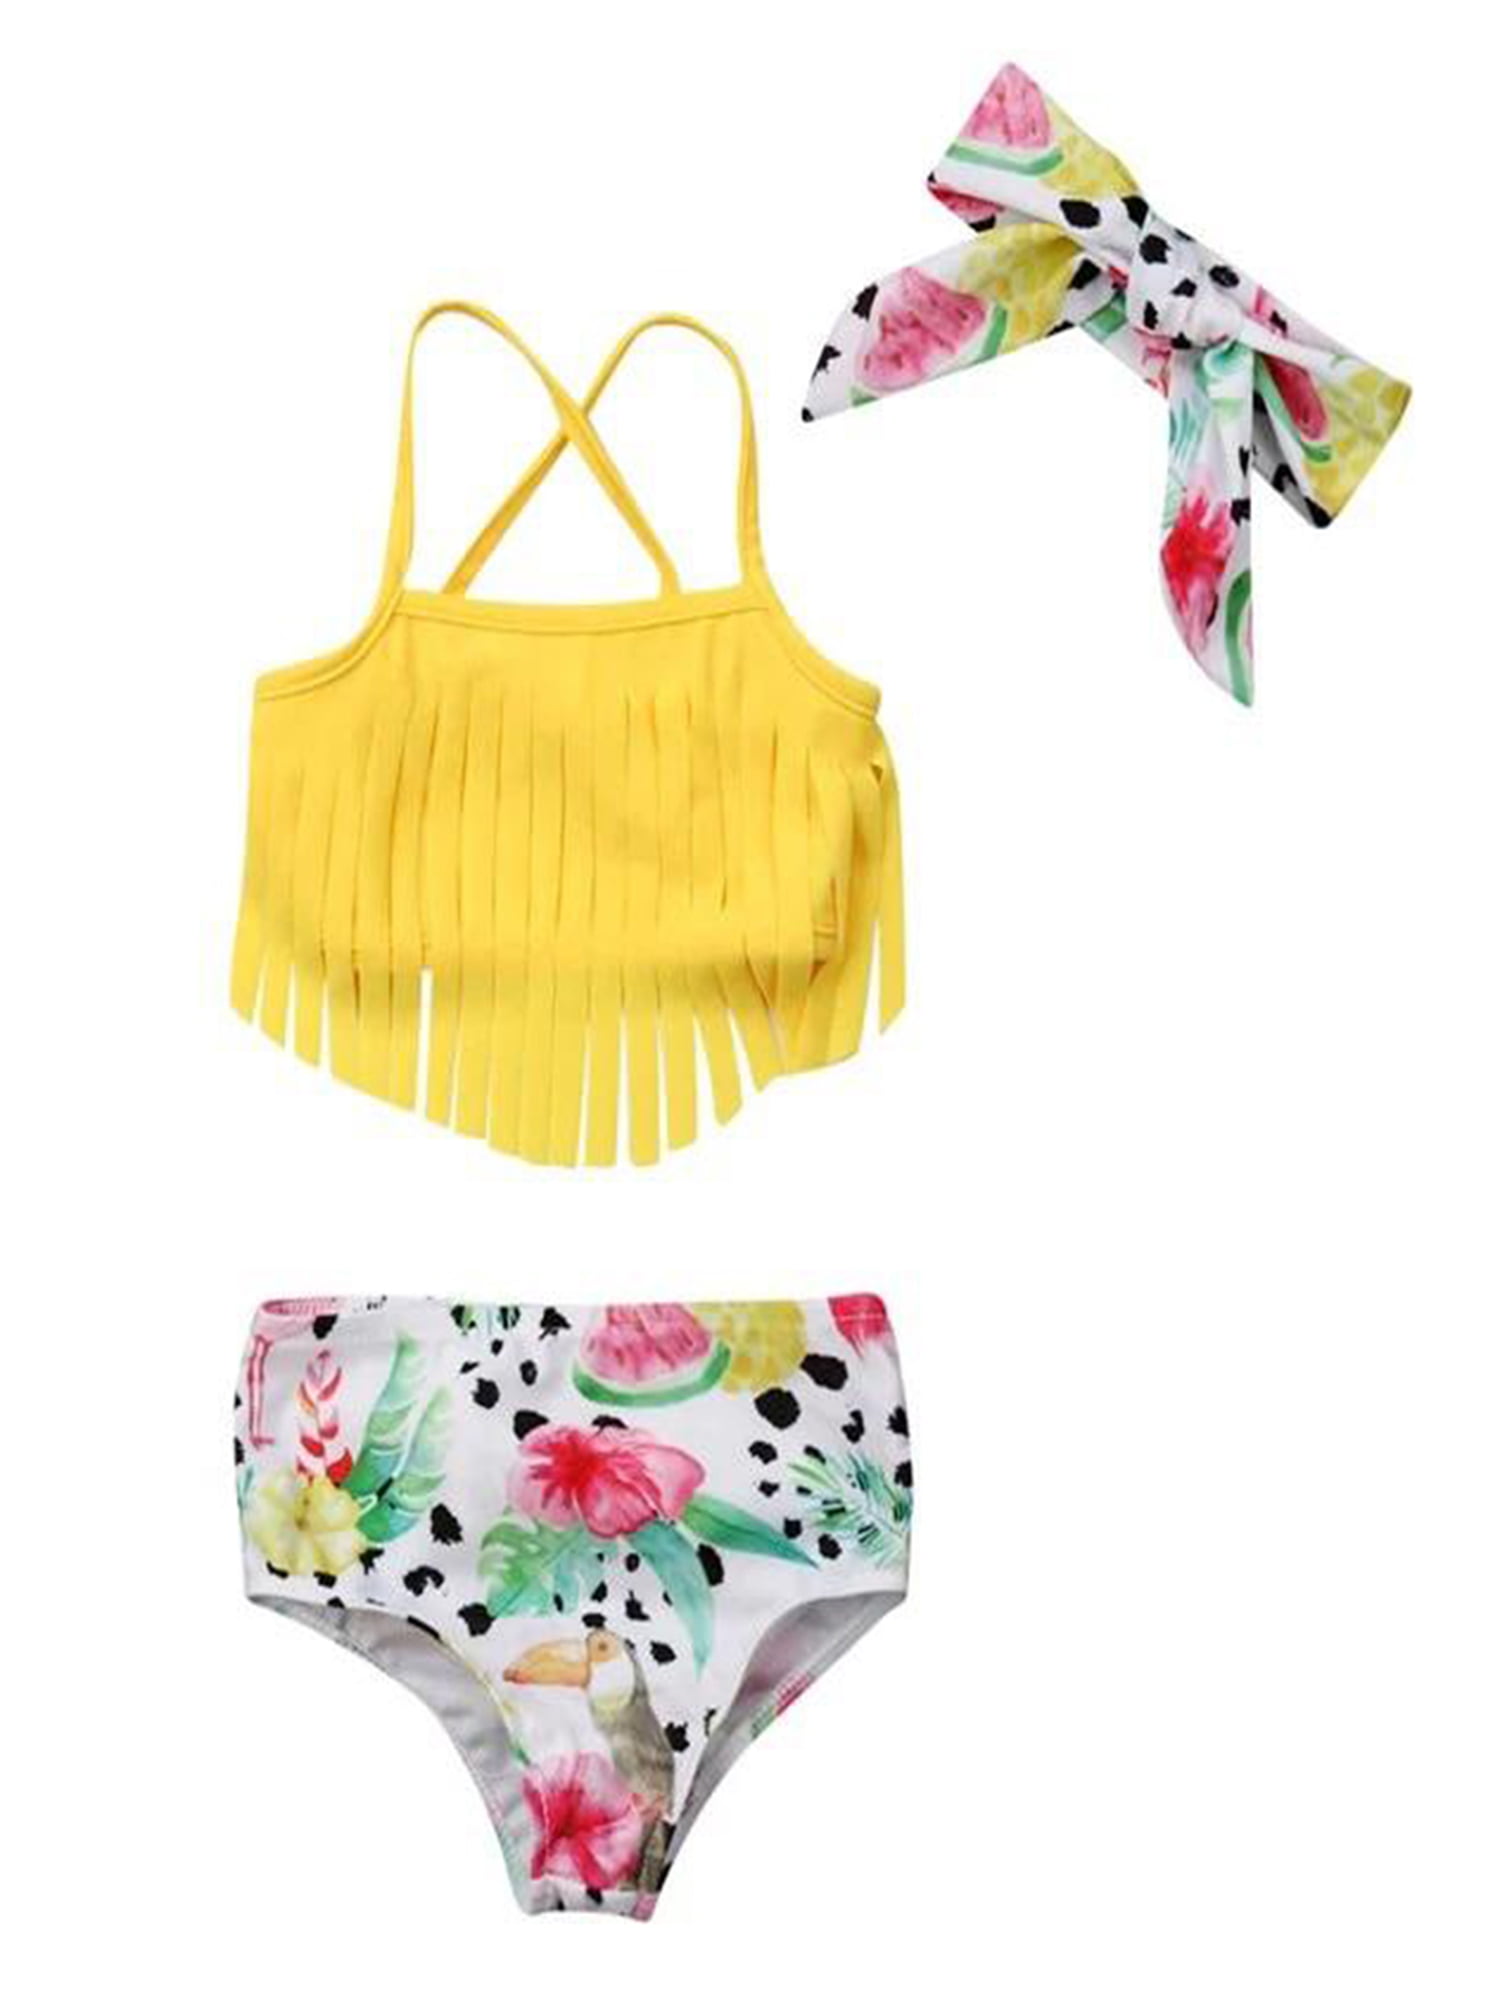 bathing suits for 12 month old girl